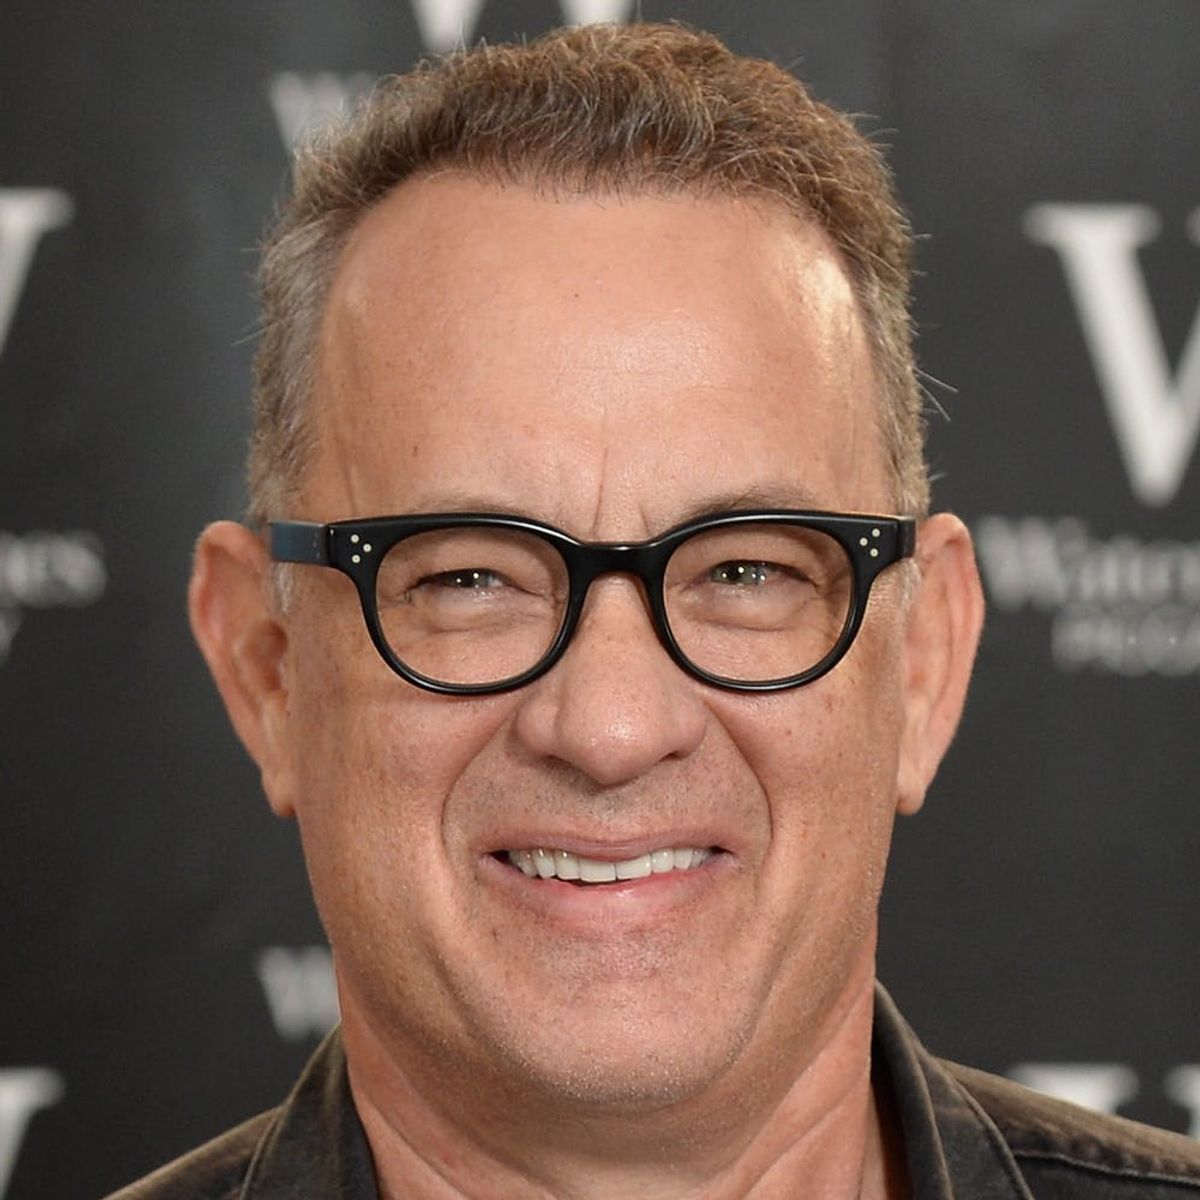 Tom Hanks Helped a Man Propose to His GF, and Cue the “Awwws”